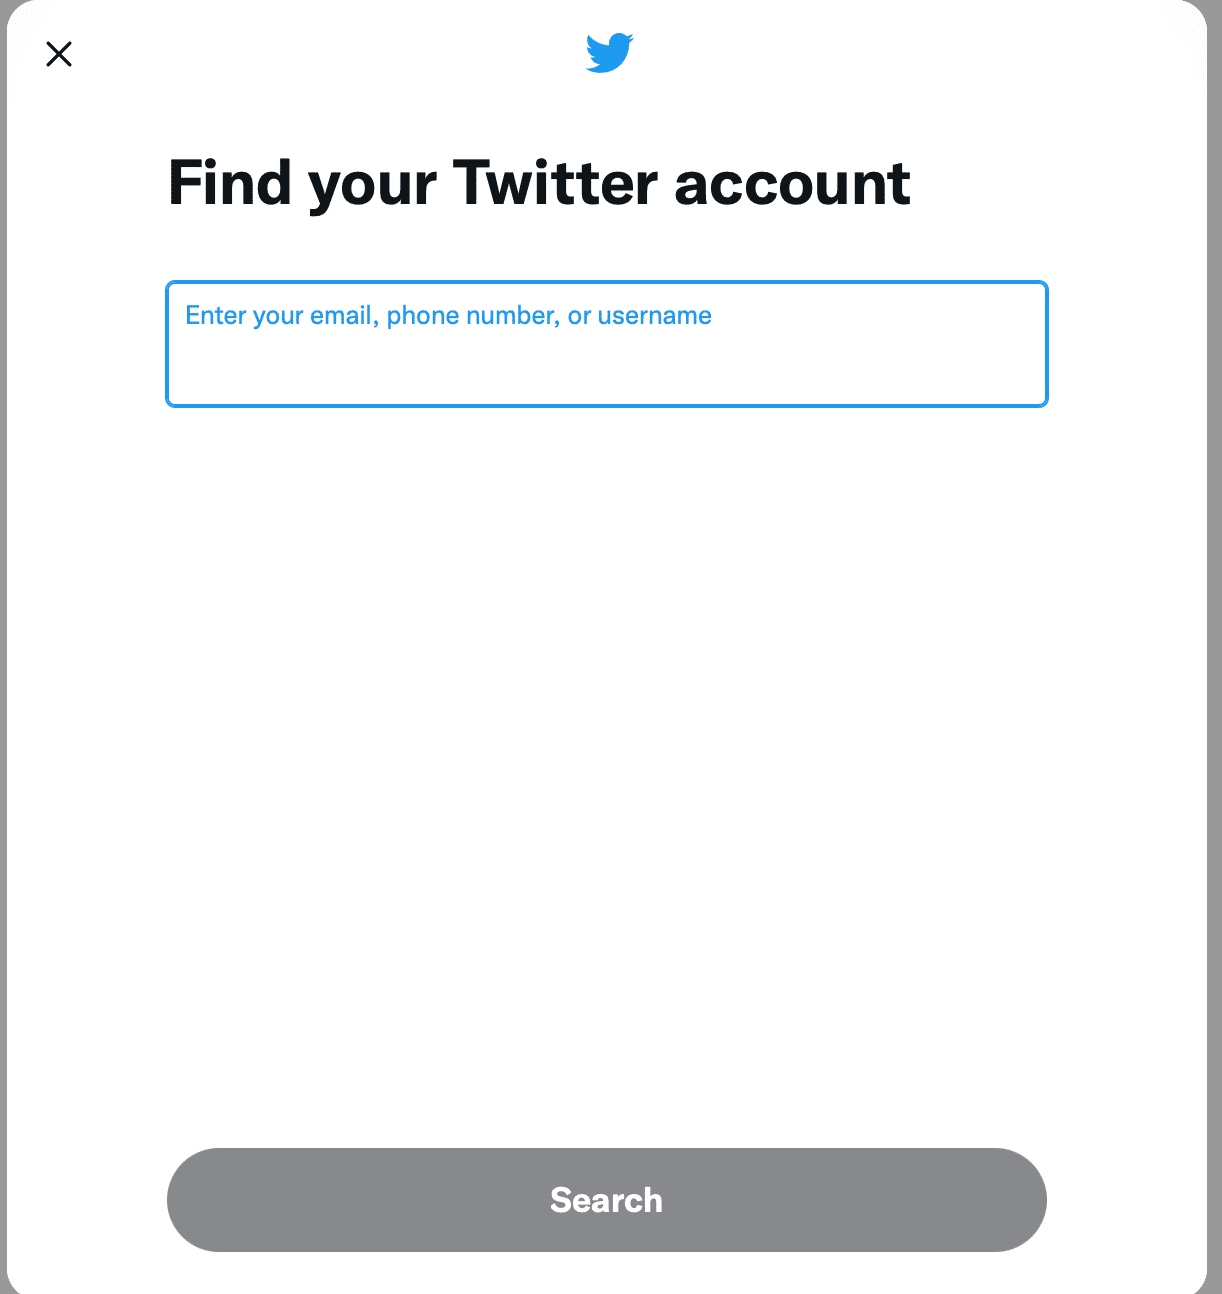 find your twitter account